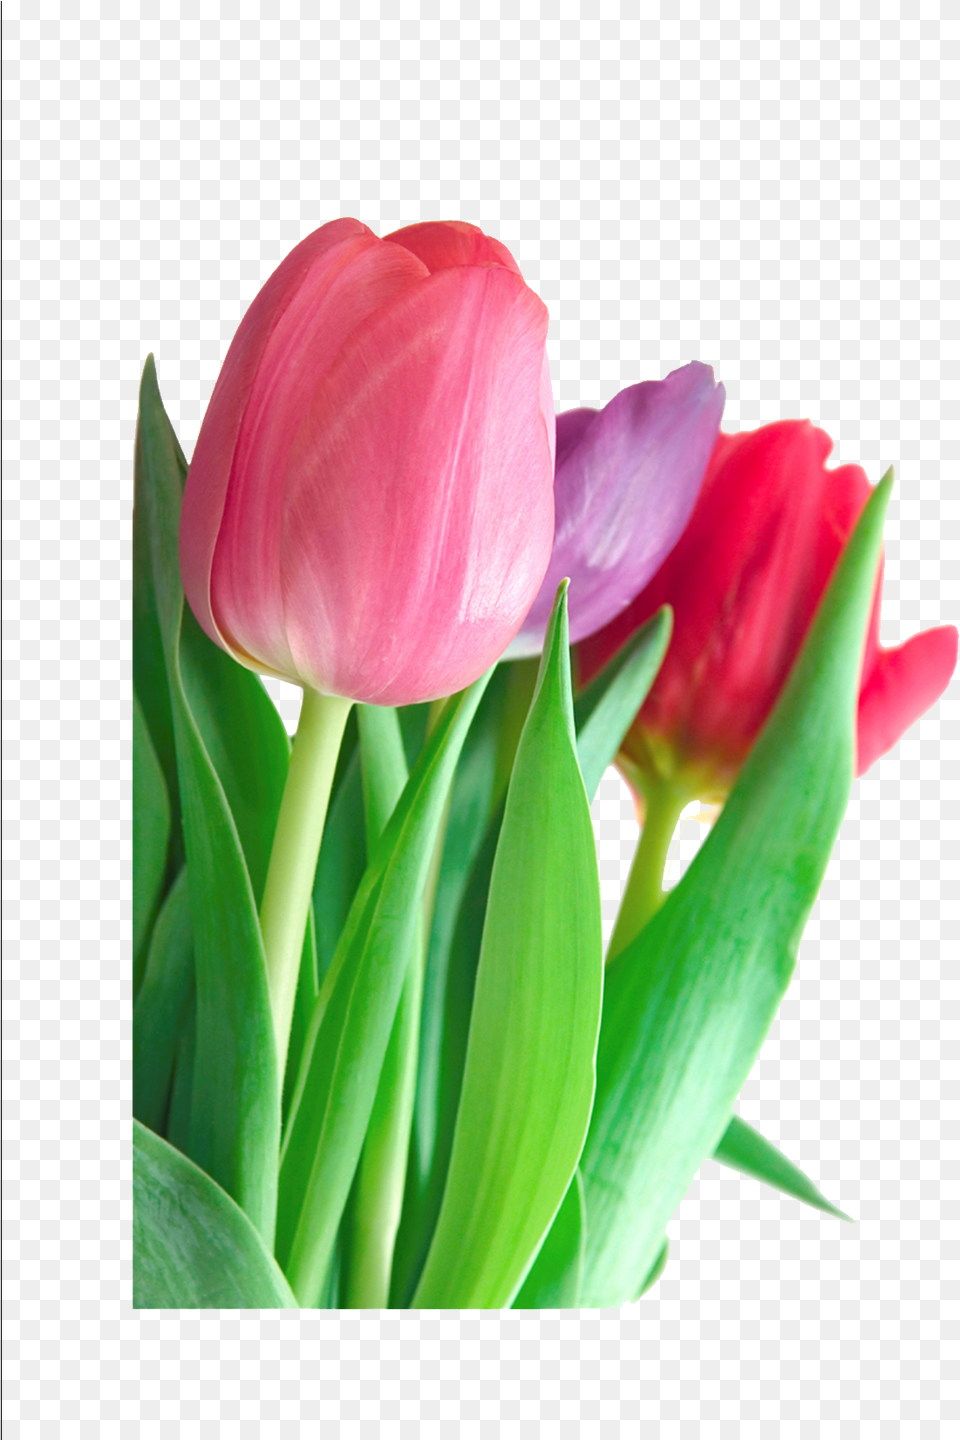 Download Tulip Clipart Hq Tulip Flower Information In English, Plant Png Image